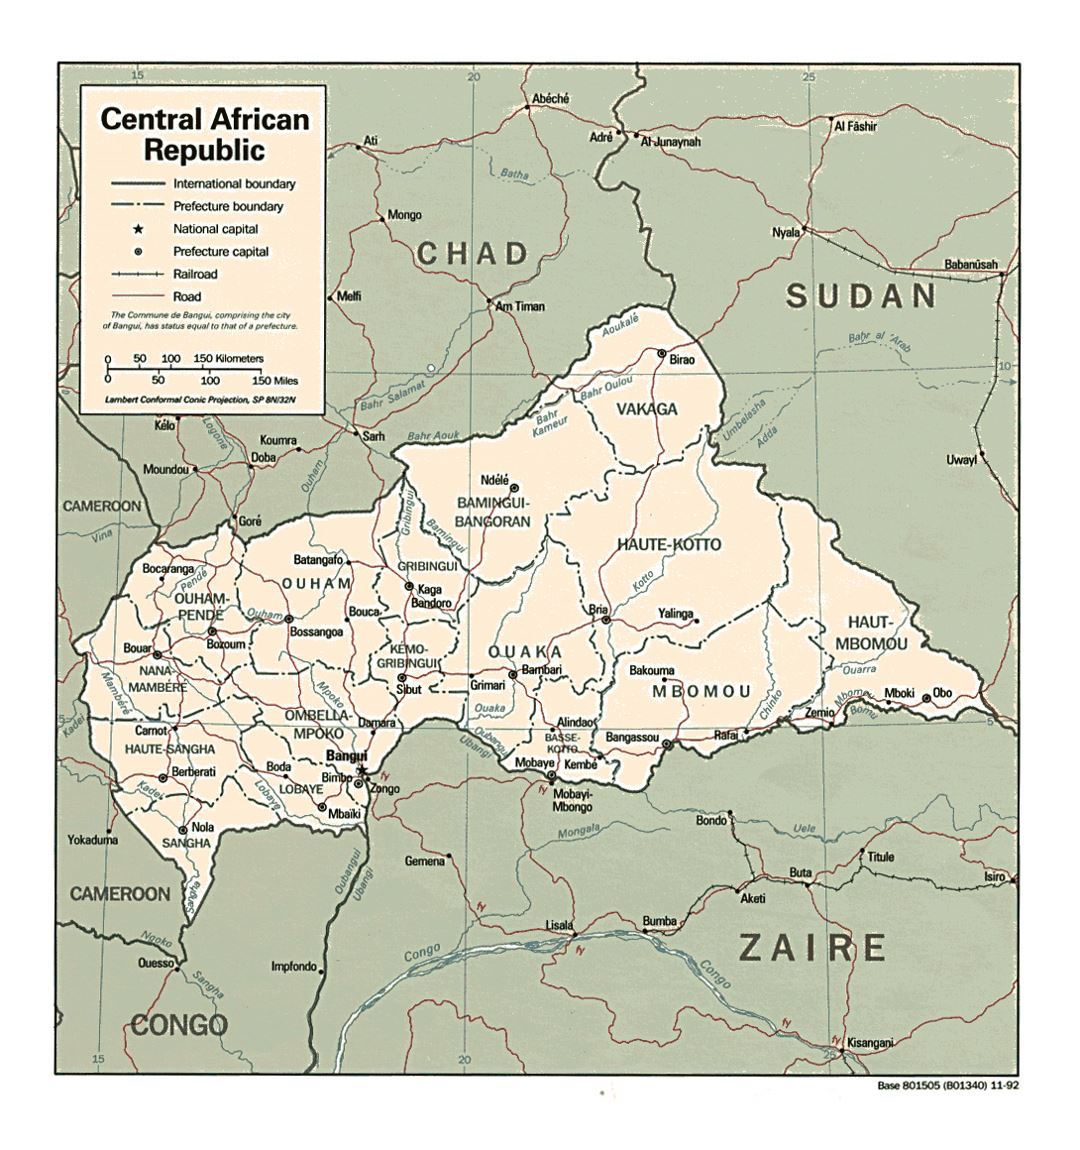 Detailed political and administrative map of Central African Republic with roads, railroads and major cities - 1992